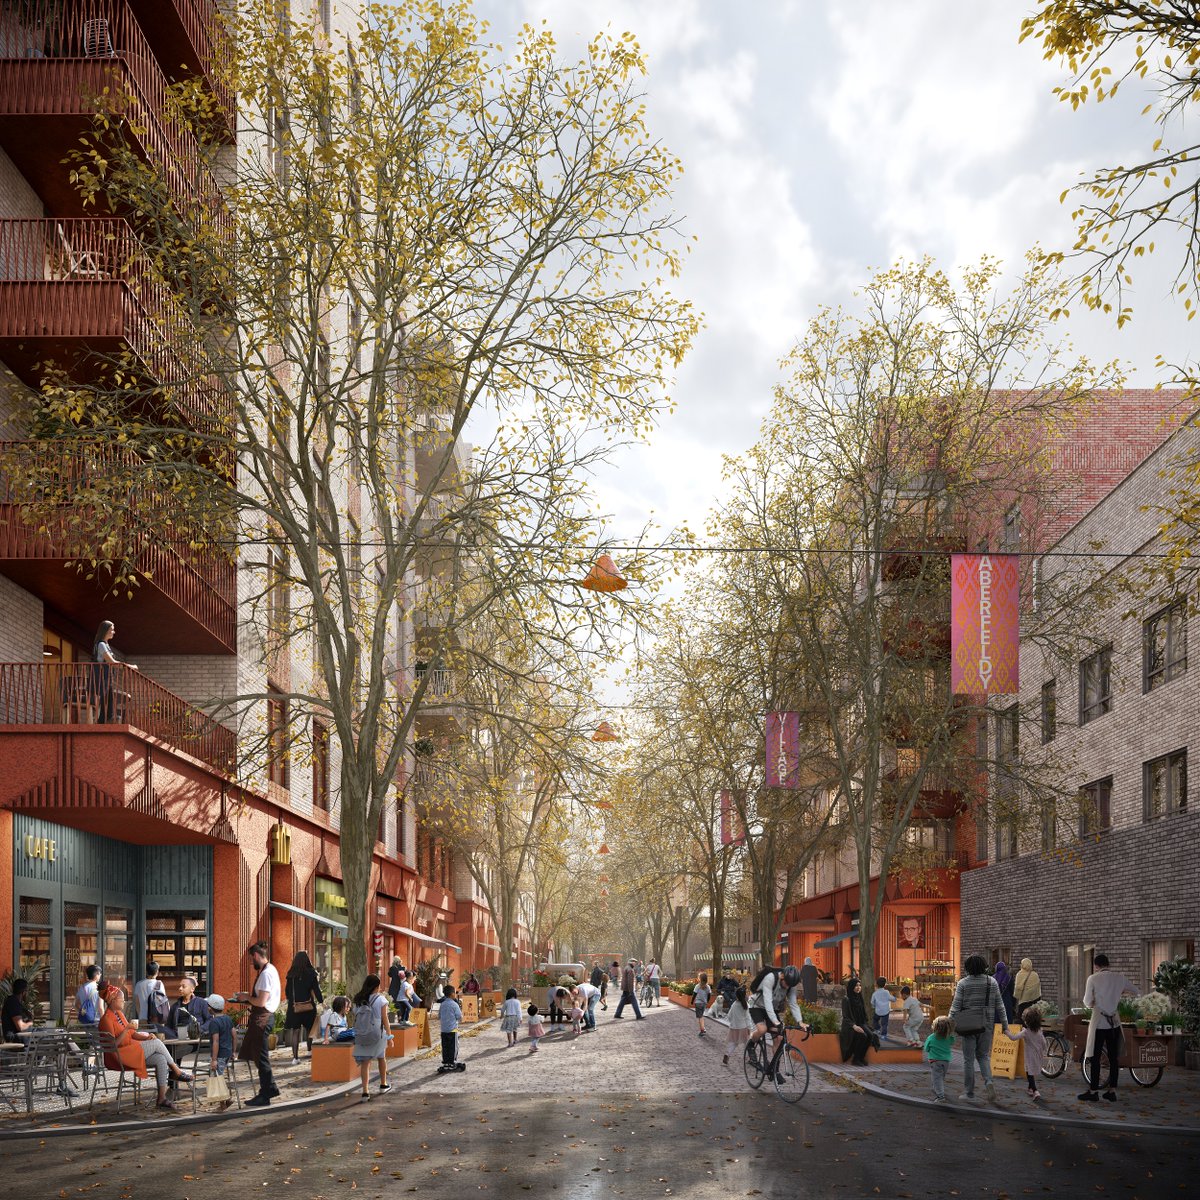 Our Aberfeldy Masterplan is in the running for THREE awards at the @nlalondon Awards! 🎉  Masterplan ✅ Mixed Use ✅ Public Realm ✅  Vote for us in the People’s Choice Award here✍️ bit.ly/3DuMQFe @PoplarHARCA @LevittBernstein @LDADesign @moco_arch @ZCD_Architects